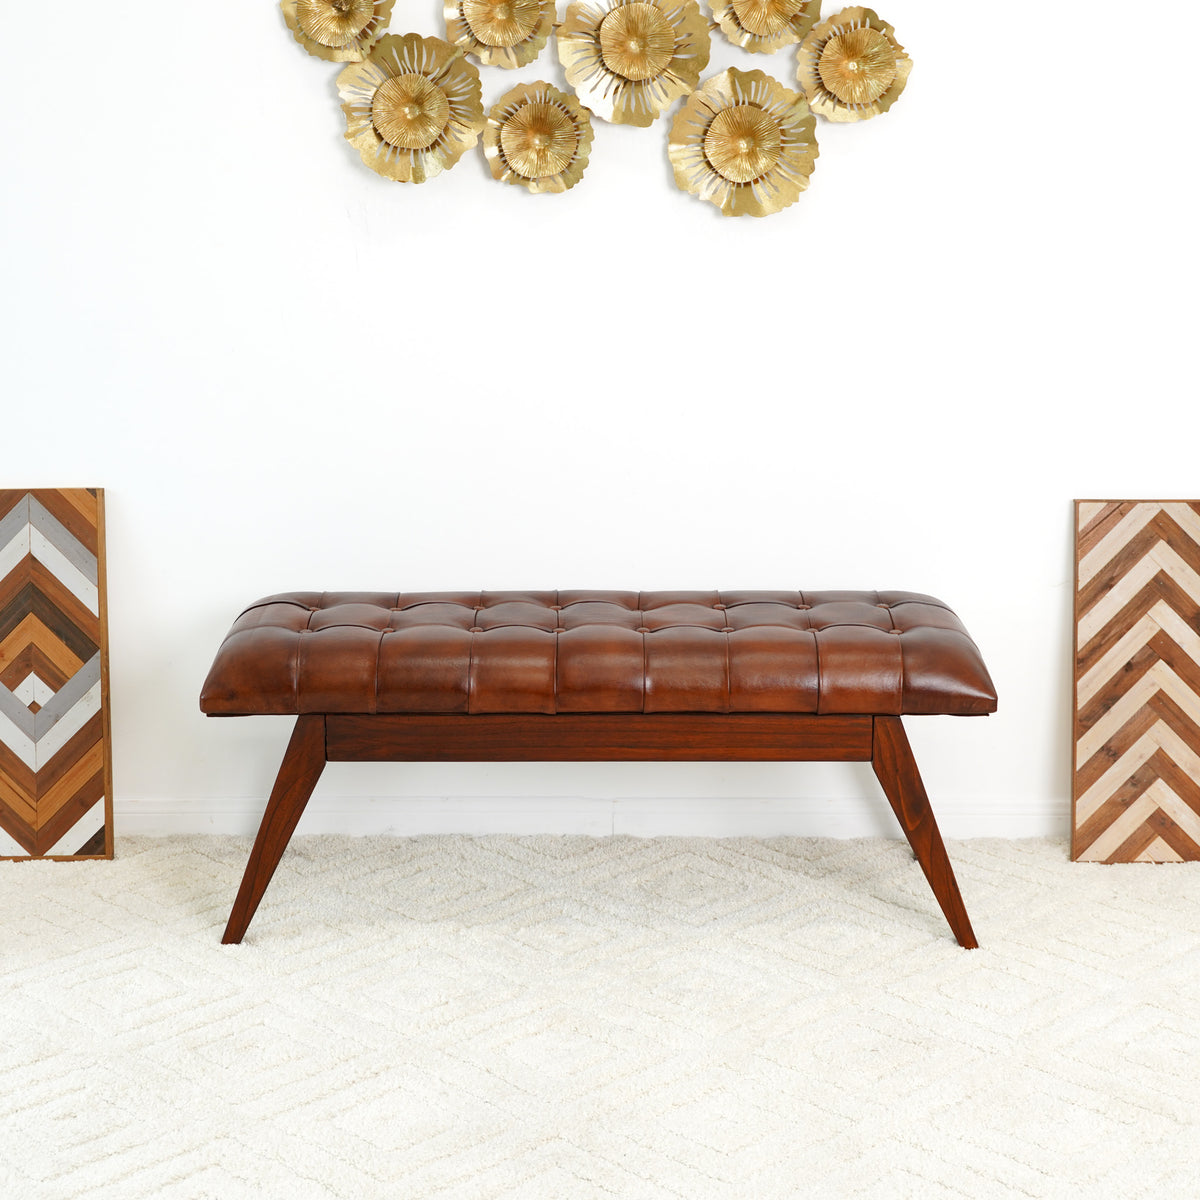 Niles Cognac Leather Bench